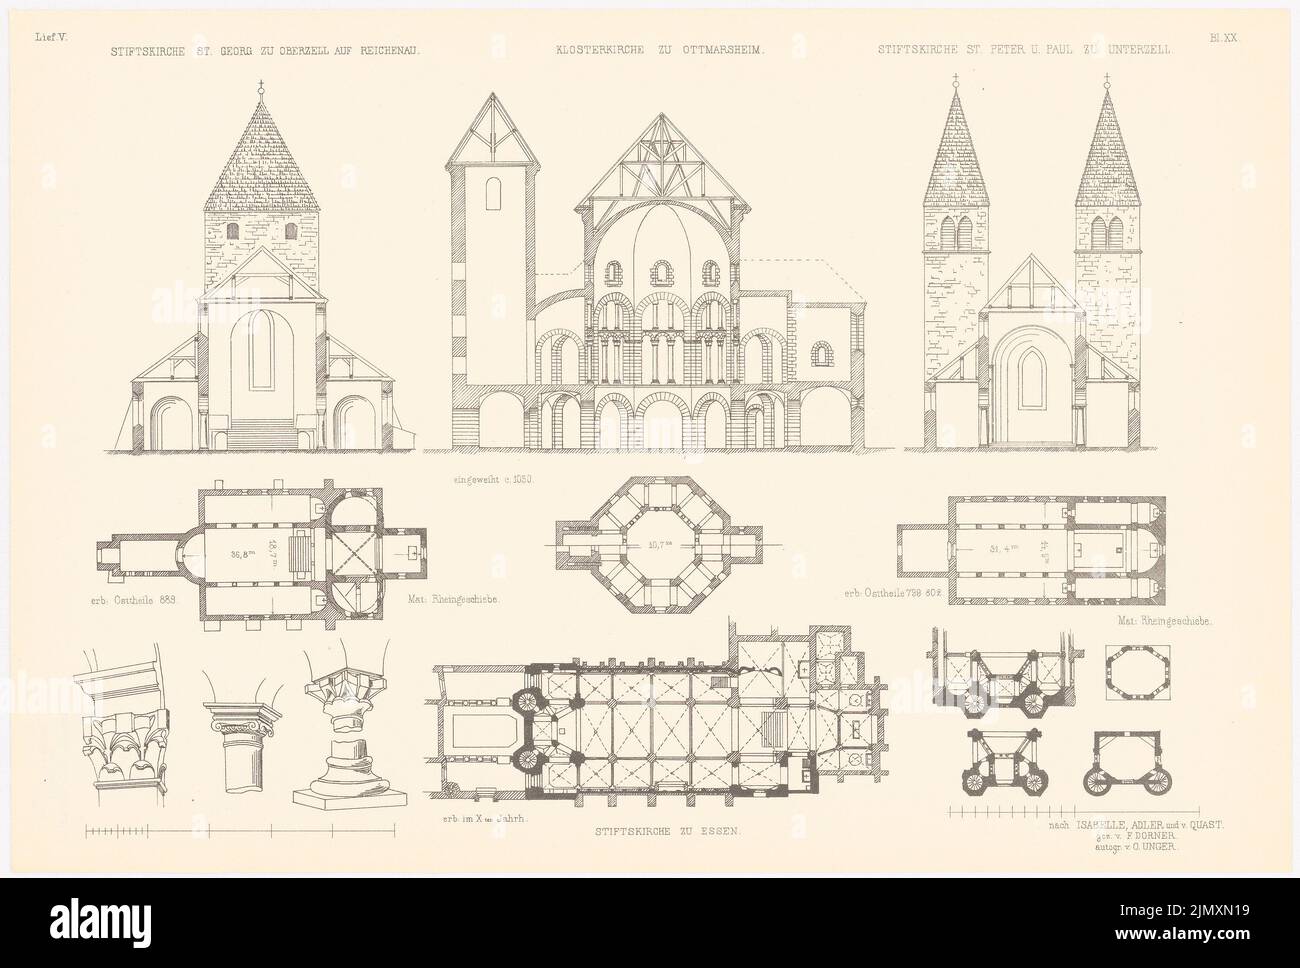 N.N., Abbey Church in Essen and on the island of Reichenau. (From: Alintchristl. U. Roman. Building, ed. Character Excep. D. Stud. TH Berlin, 1875) (1875-1875): cross sections, floor plans, details, St Georg zu Oberzell, monastery church in Ottmarsheim, Stiftskirche To Unterzell. Print on paper, 35.6 x 52.7 cm (including scan edges) Stock Photo